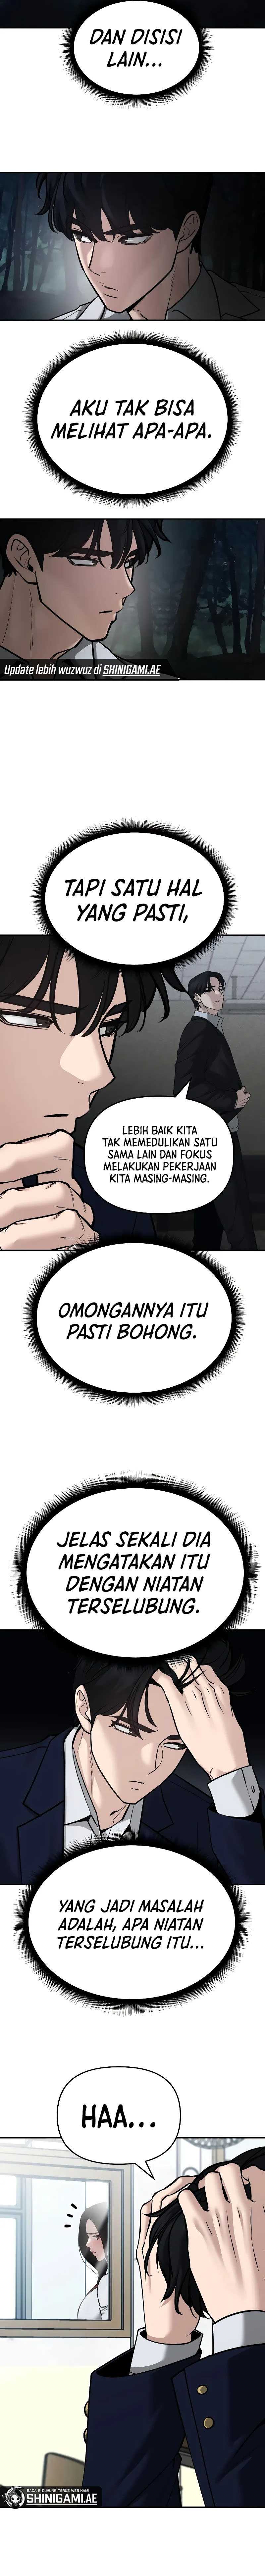 The Bully In Charge Chapter 86